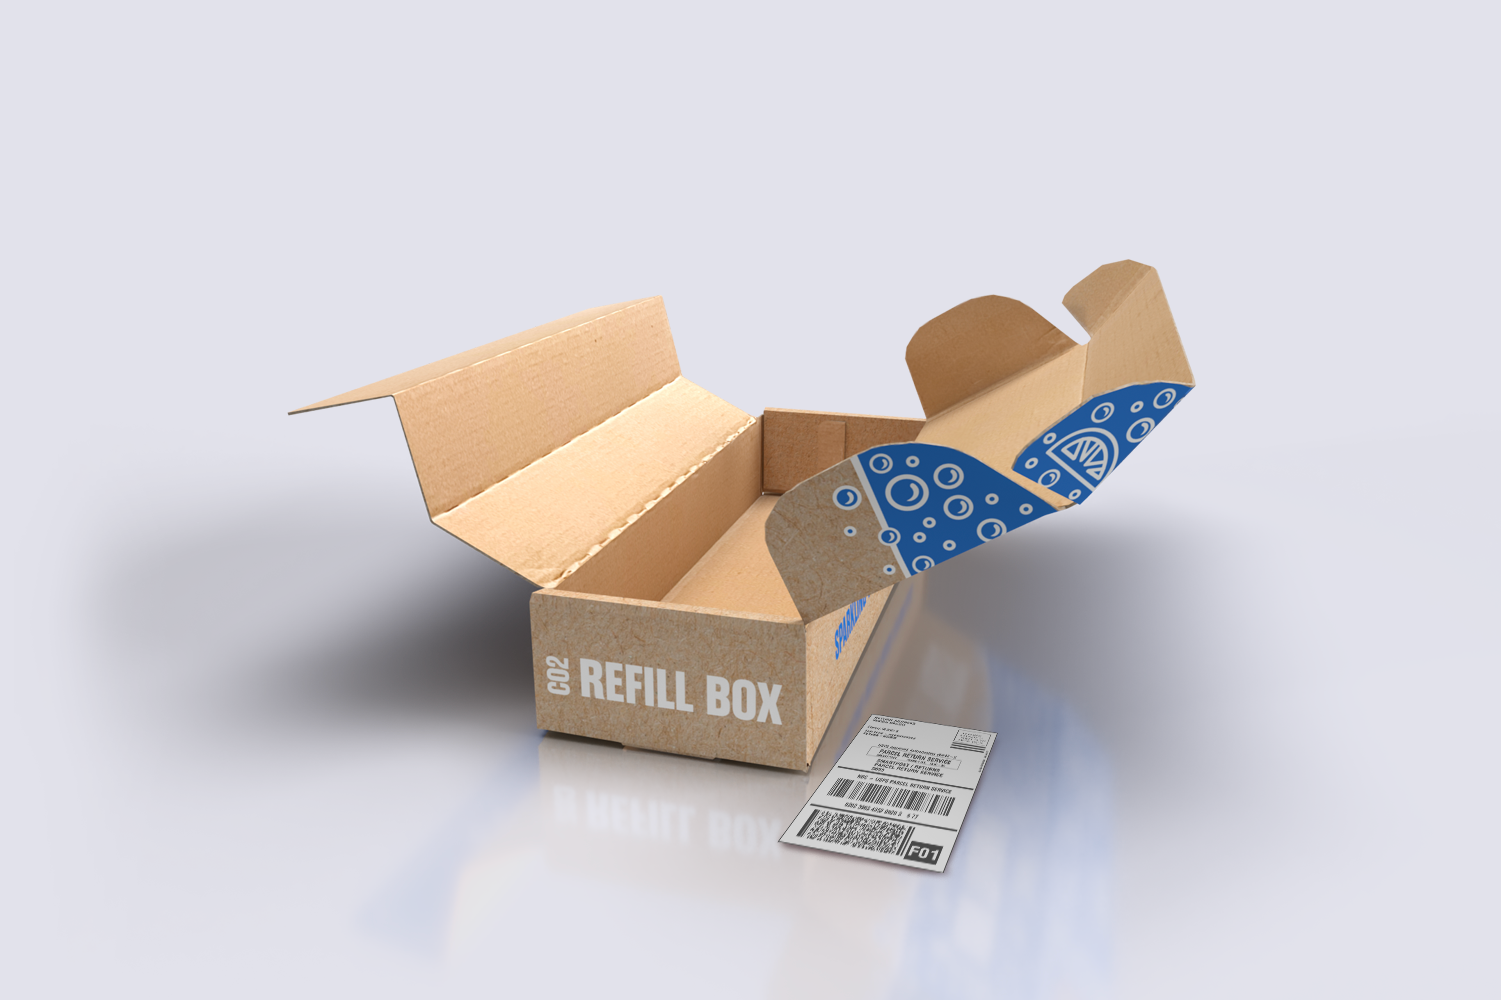 An open cardboard CO2 refill box from Soda Sense with a shipping label displayed for easy and convenient exchanges.